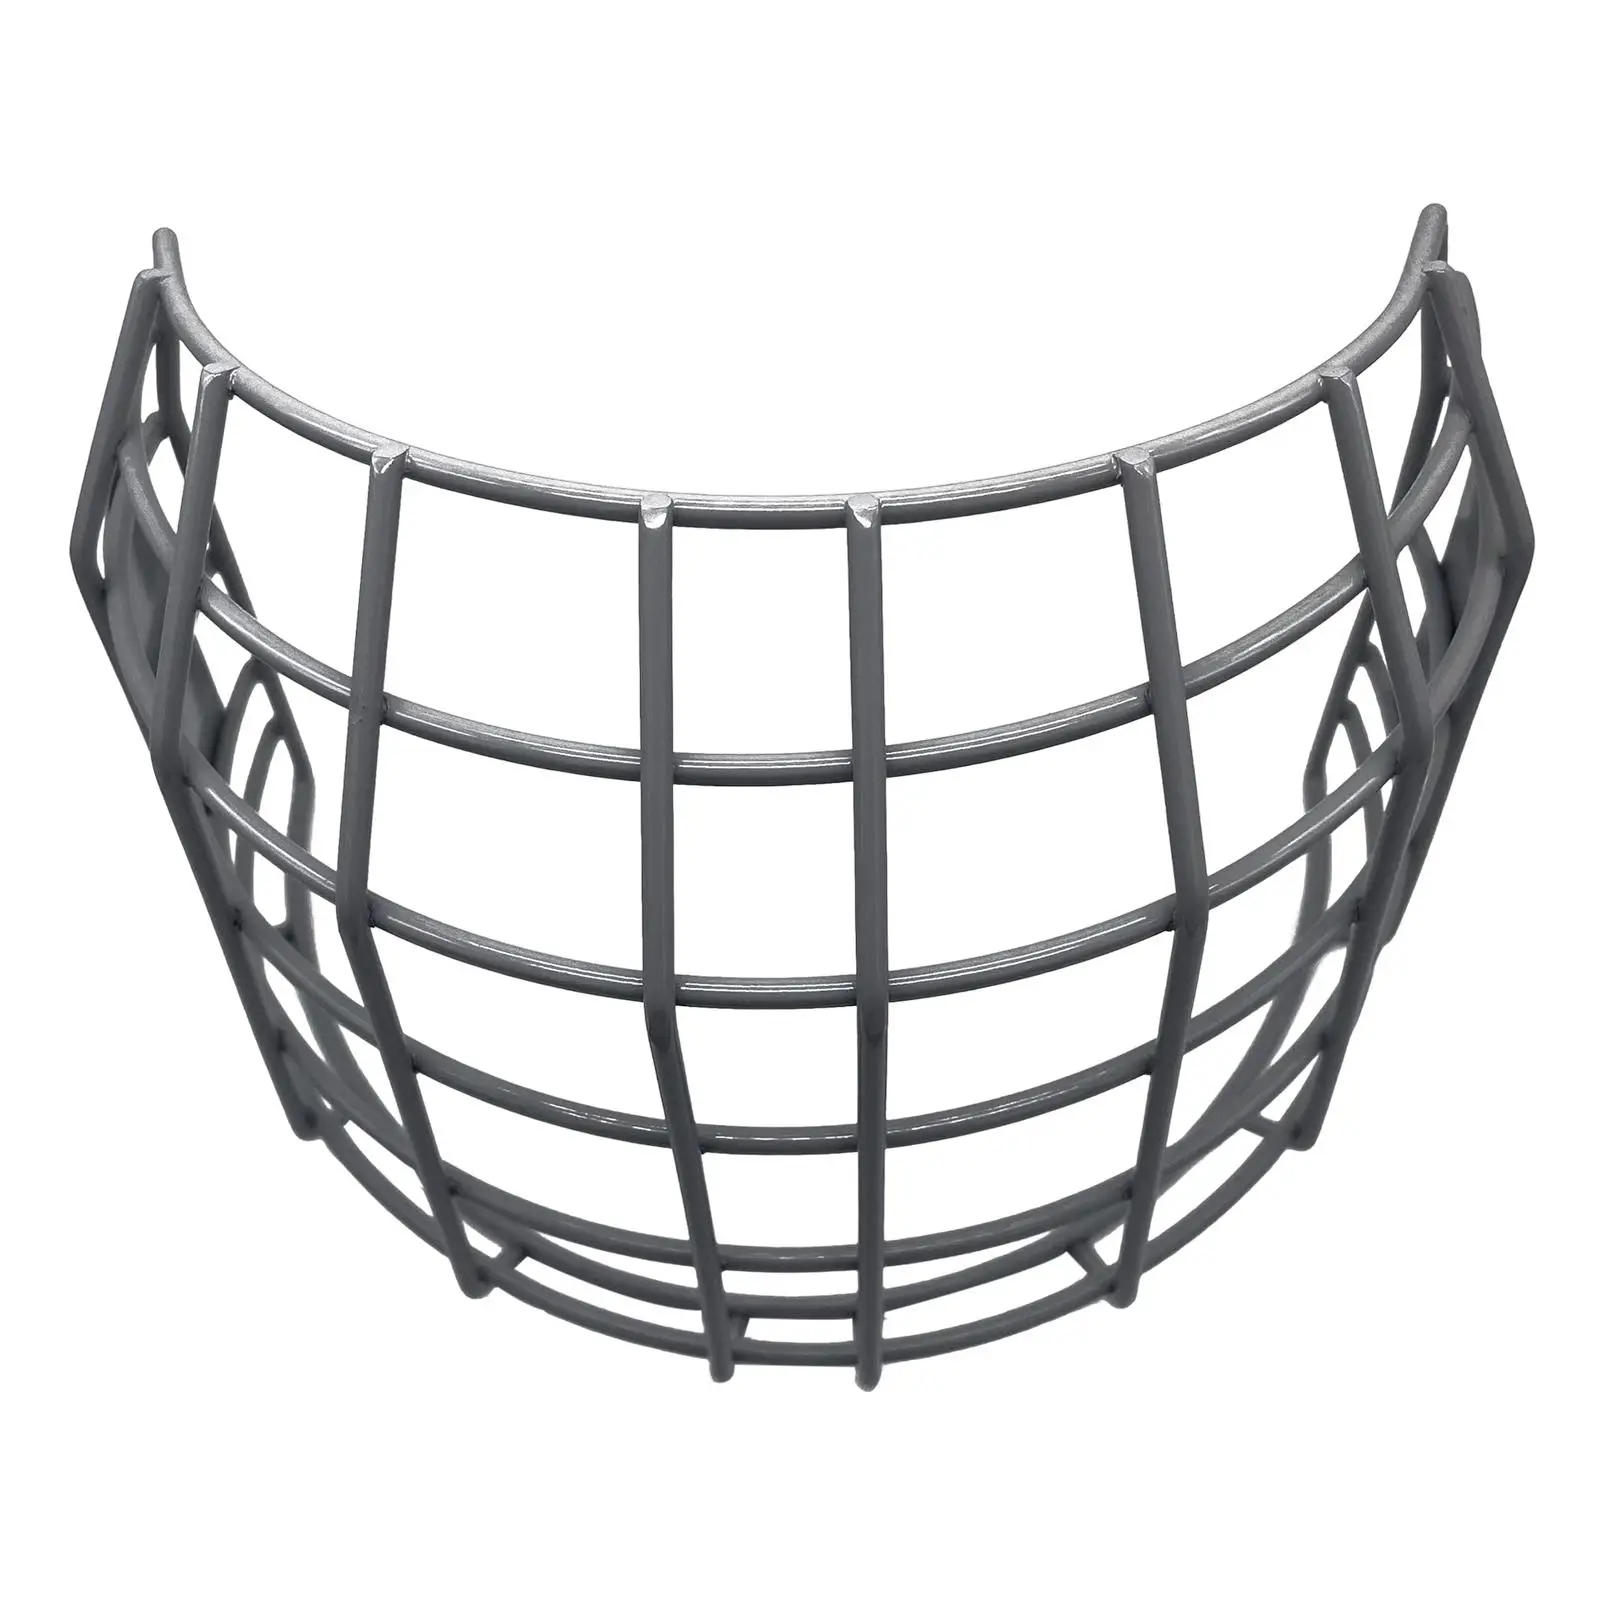 Batting Helmet Mask Outdoor Sport Protector Wire Face Protective Mask Baseball Face Guard for Teeball